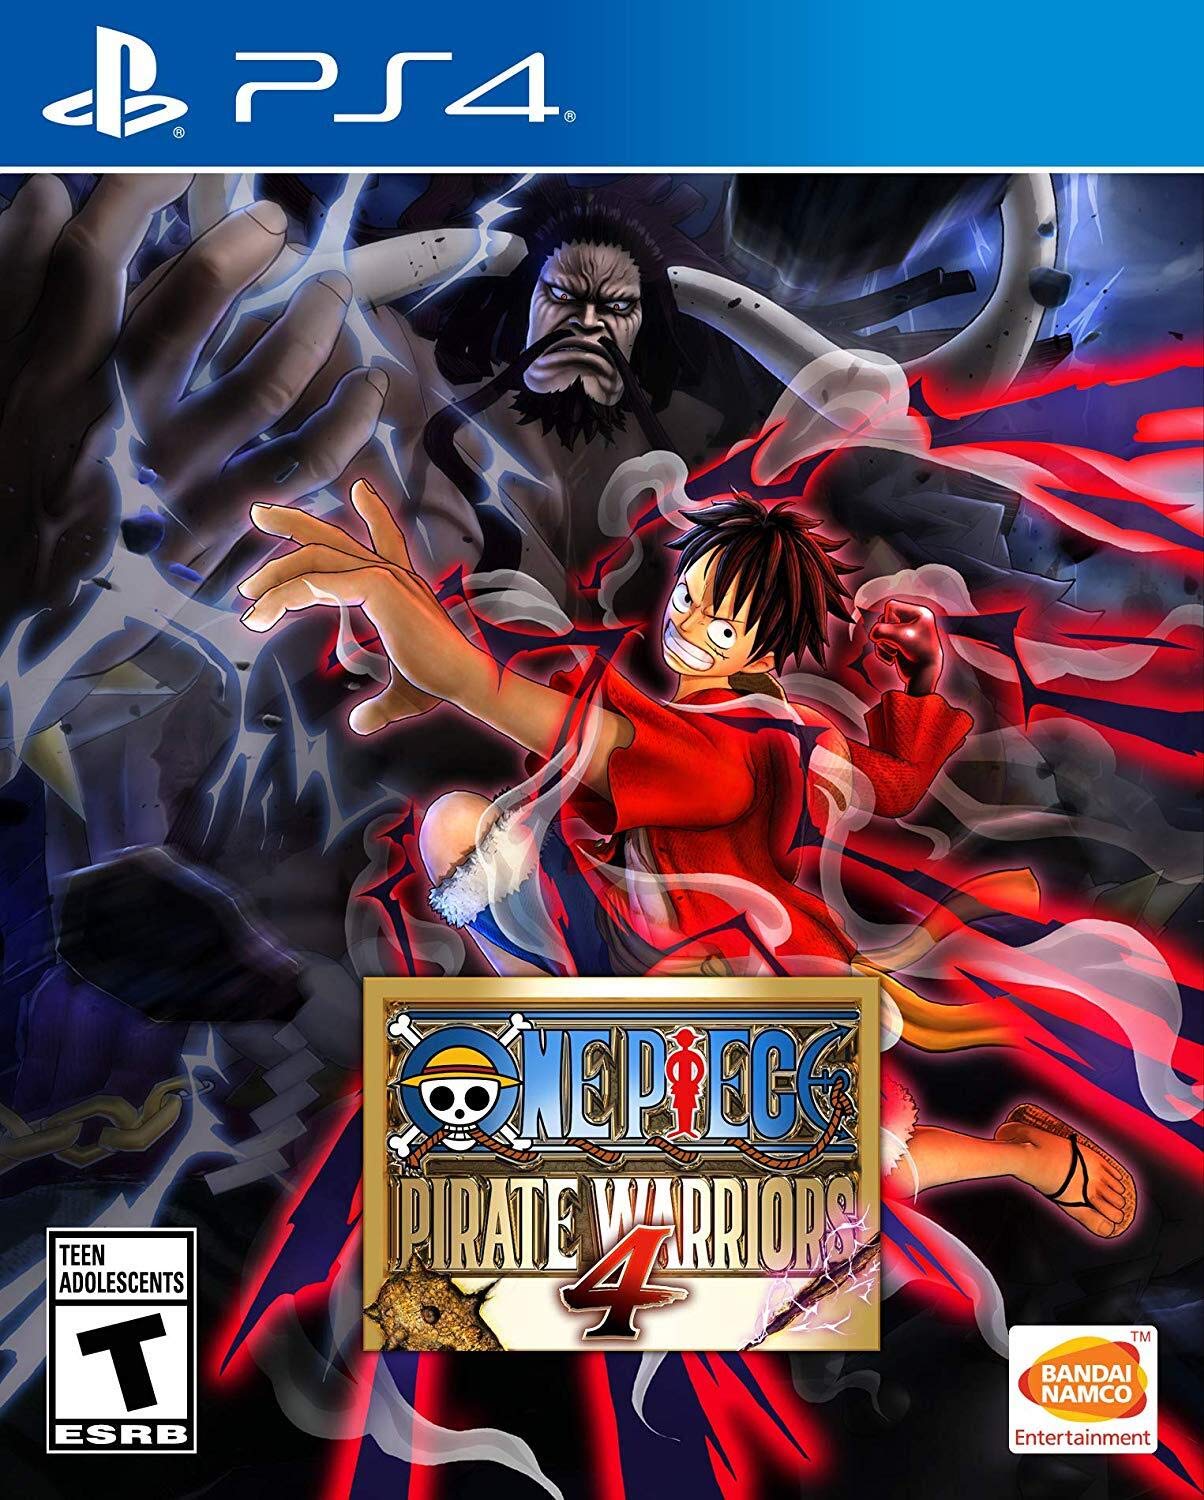 New Games: ONE PIECE - PIRATE WARRIORS 4 (PC, PS4, Xbox One, Nintendo